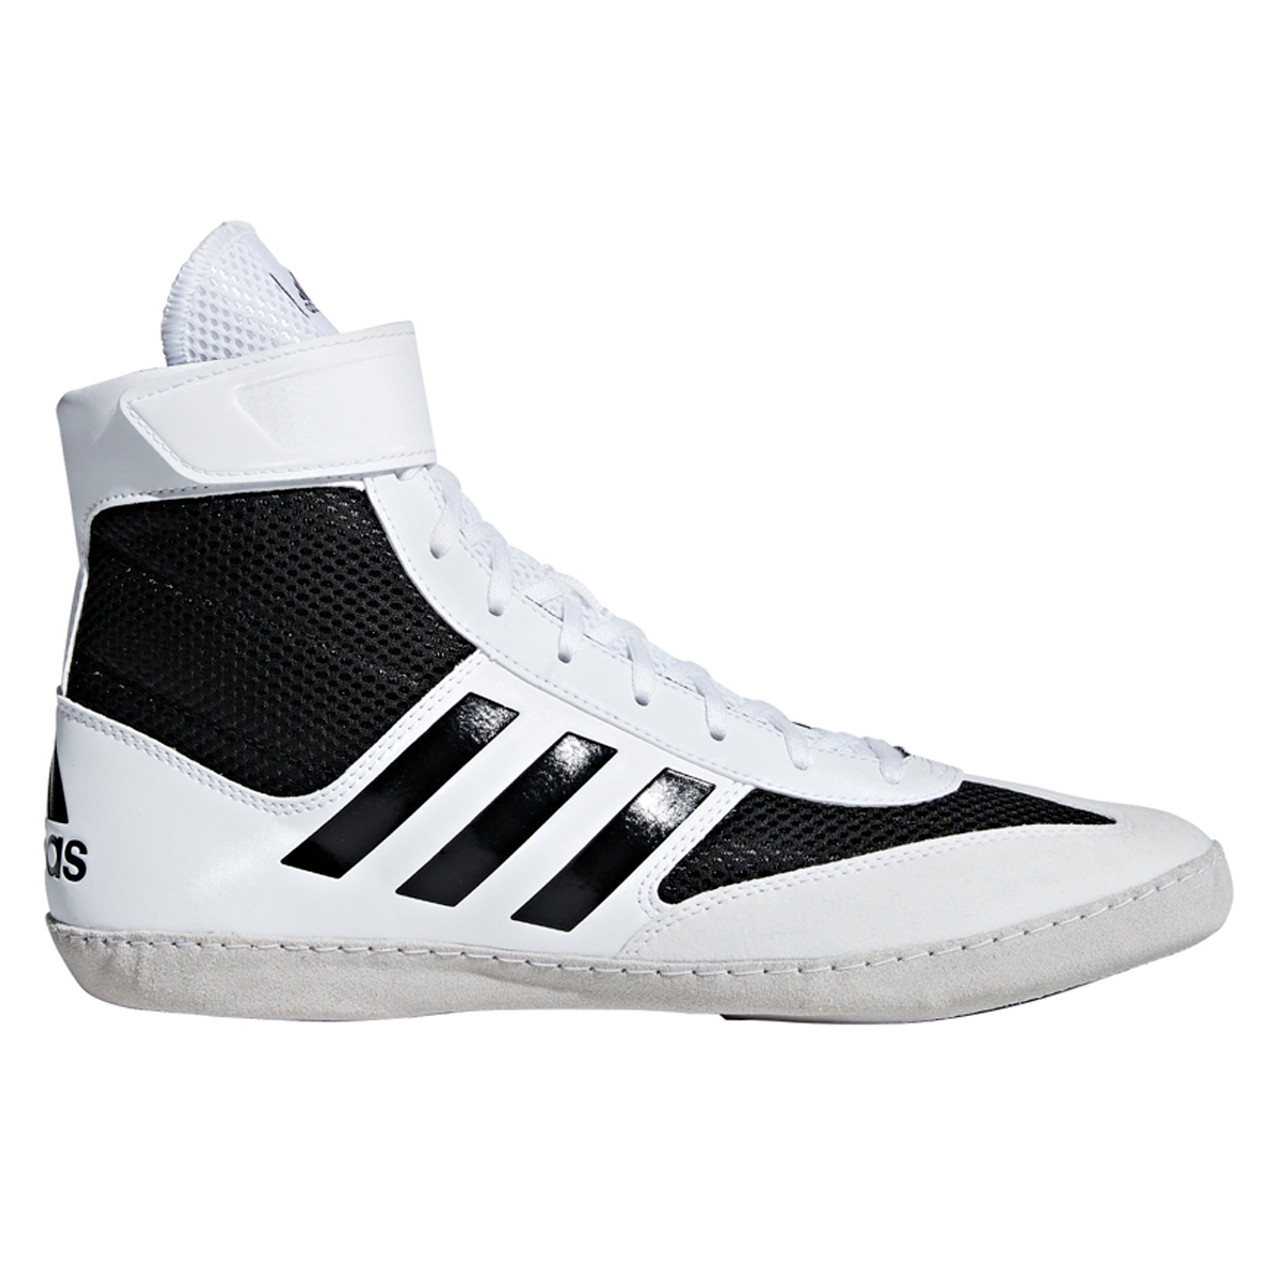 white and black wrestling shoes